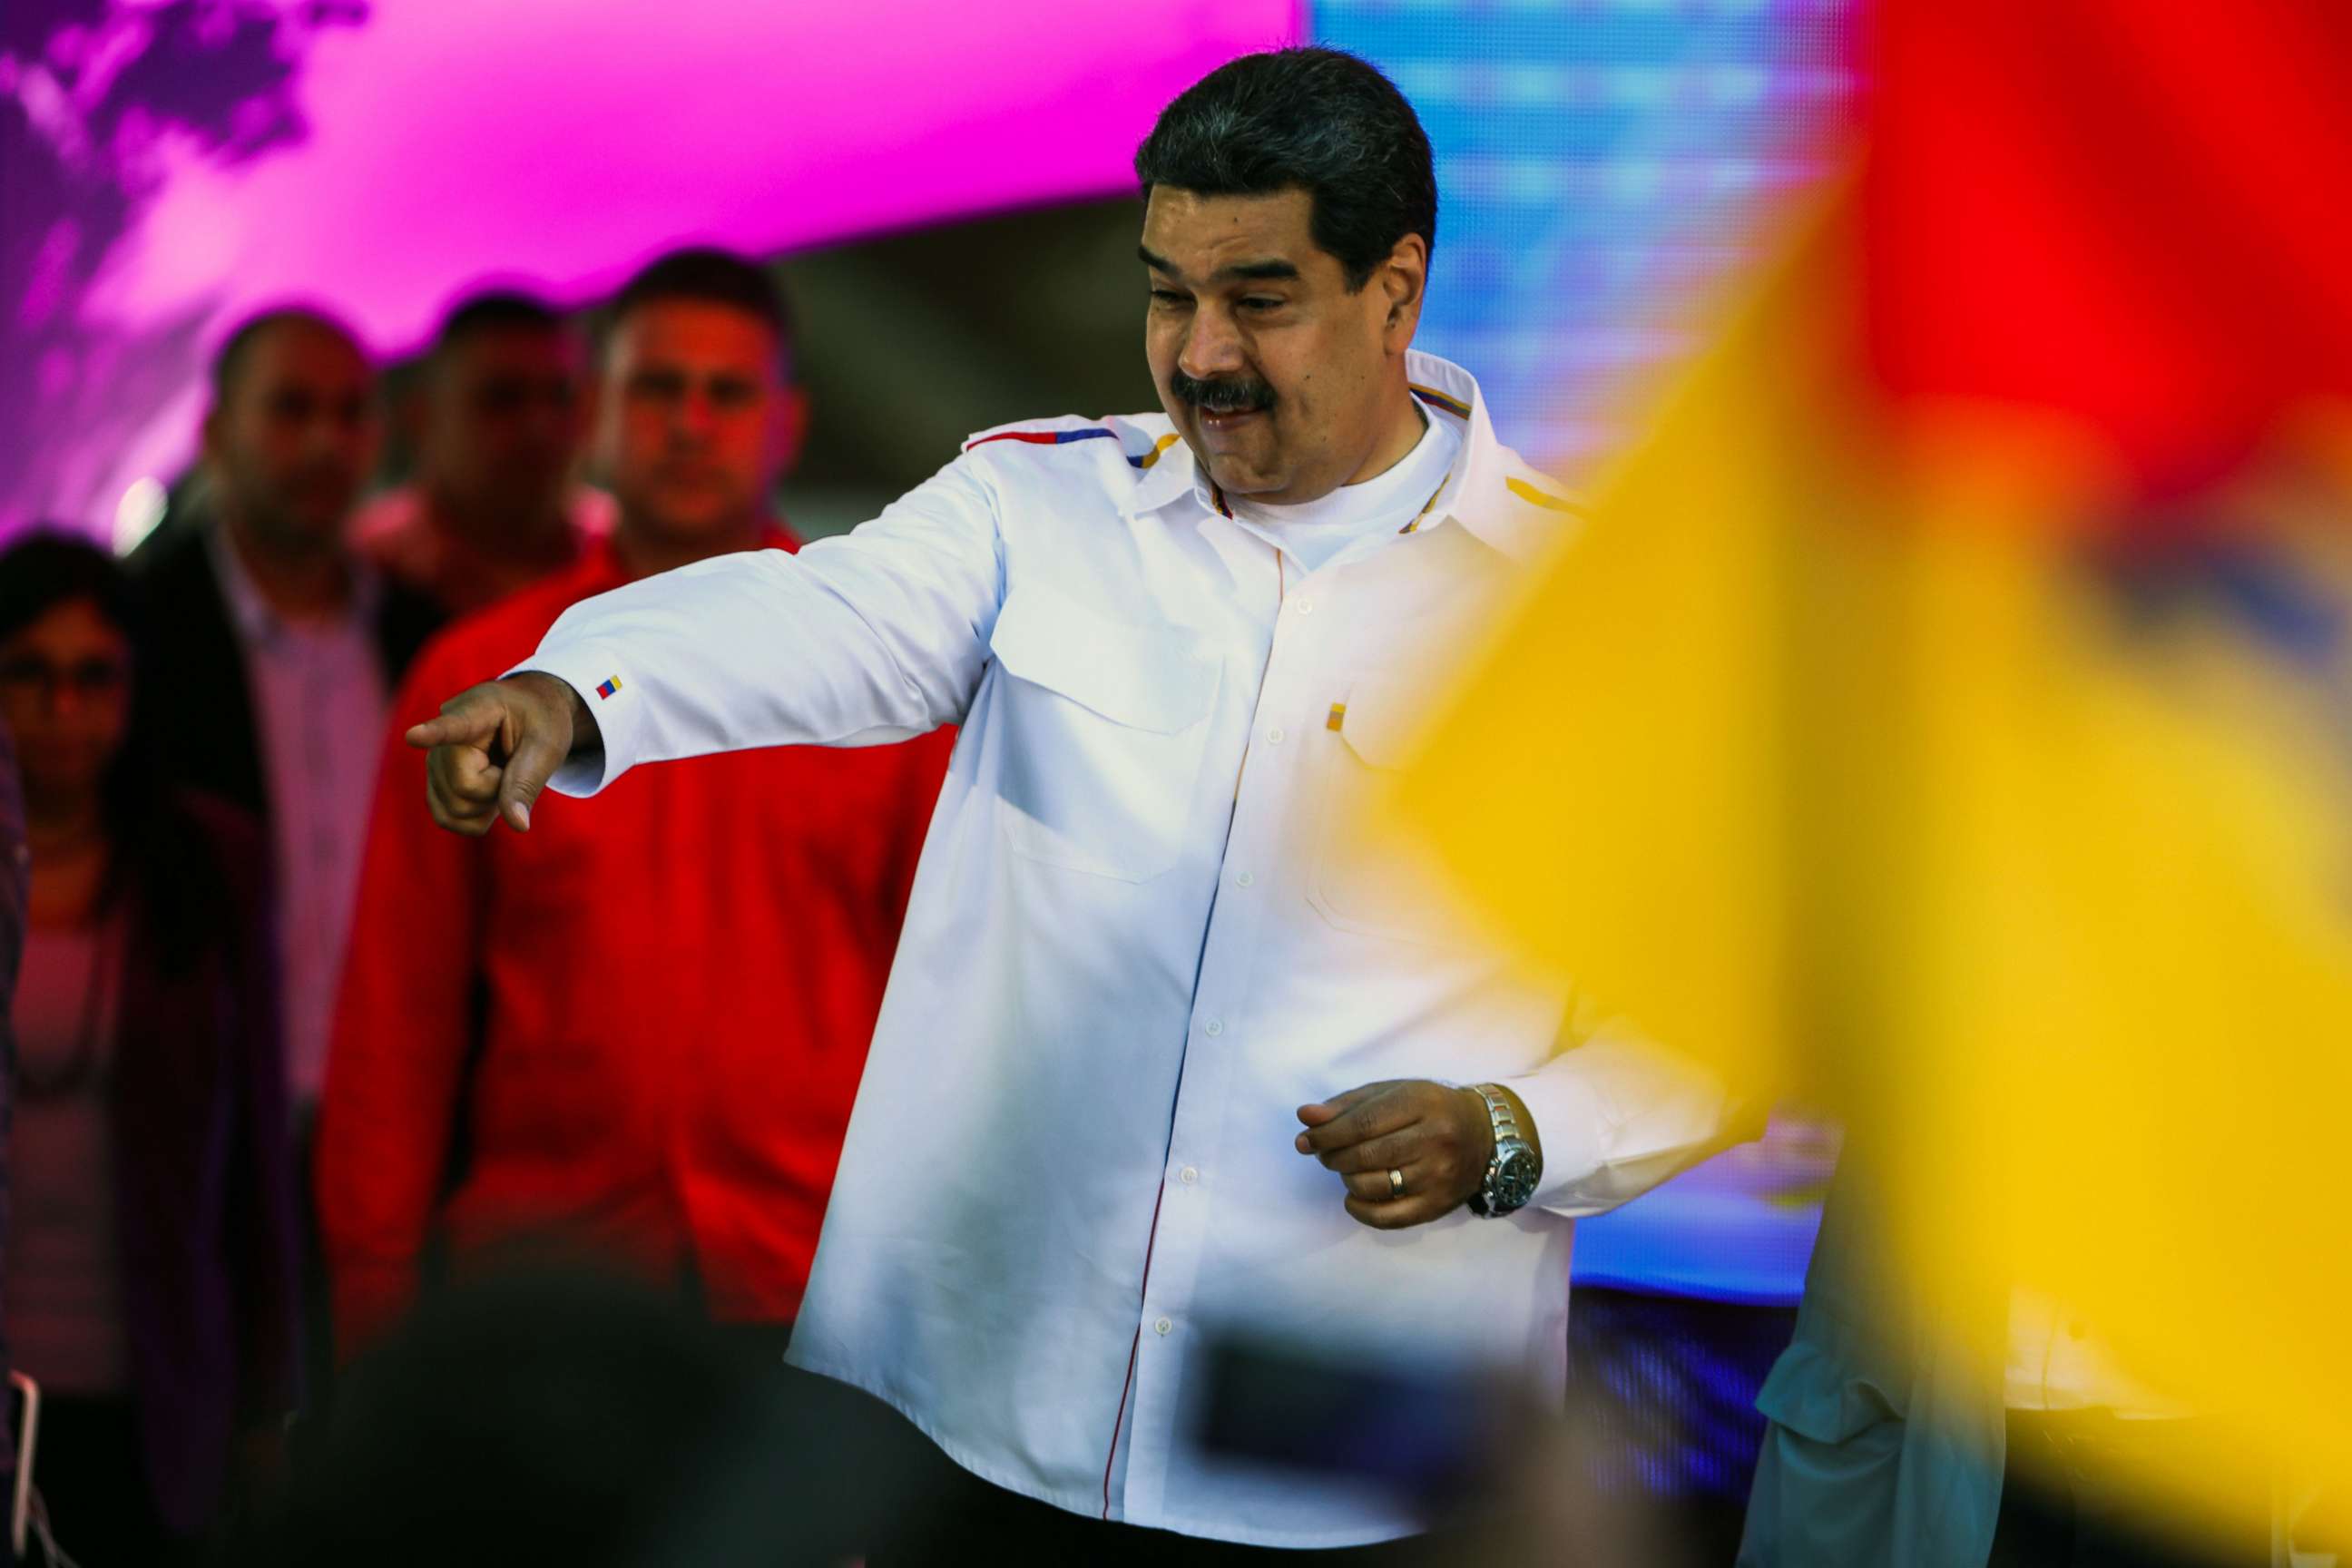 PHOTO: Venezuela's President Nicolas Maduro gestures during celebrations for "Youth Day" at the Bolivar Square in Caracas, Venezuela on Feb. 12, 2019.